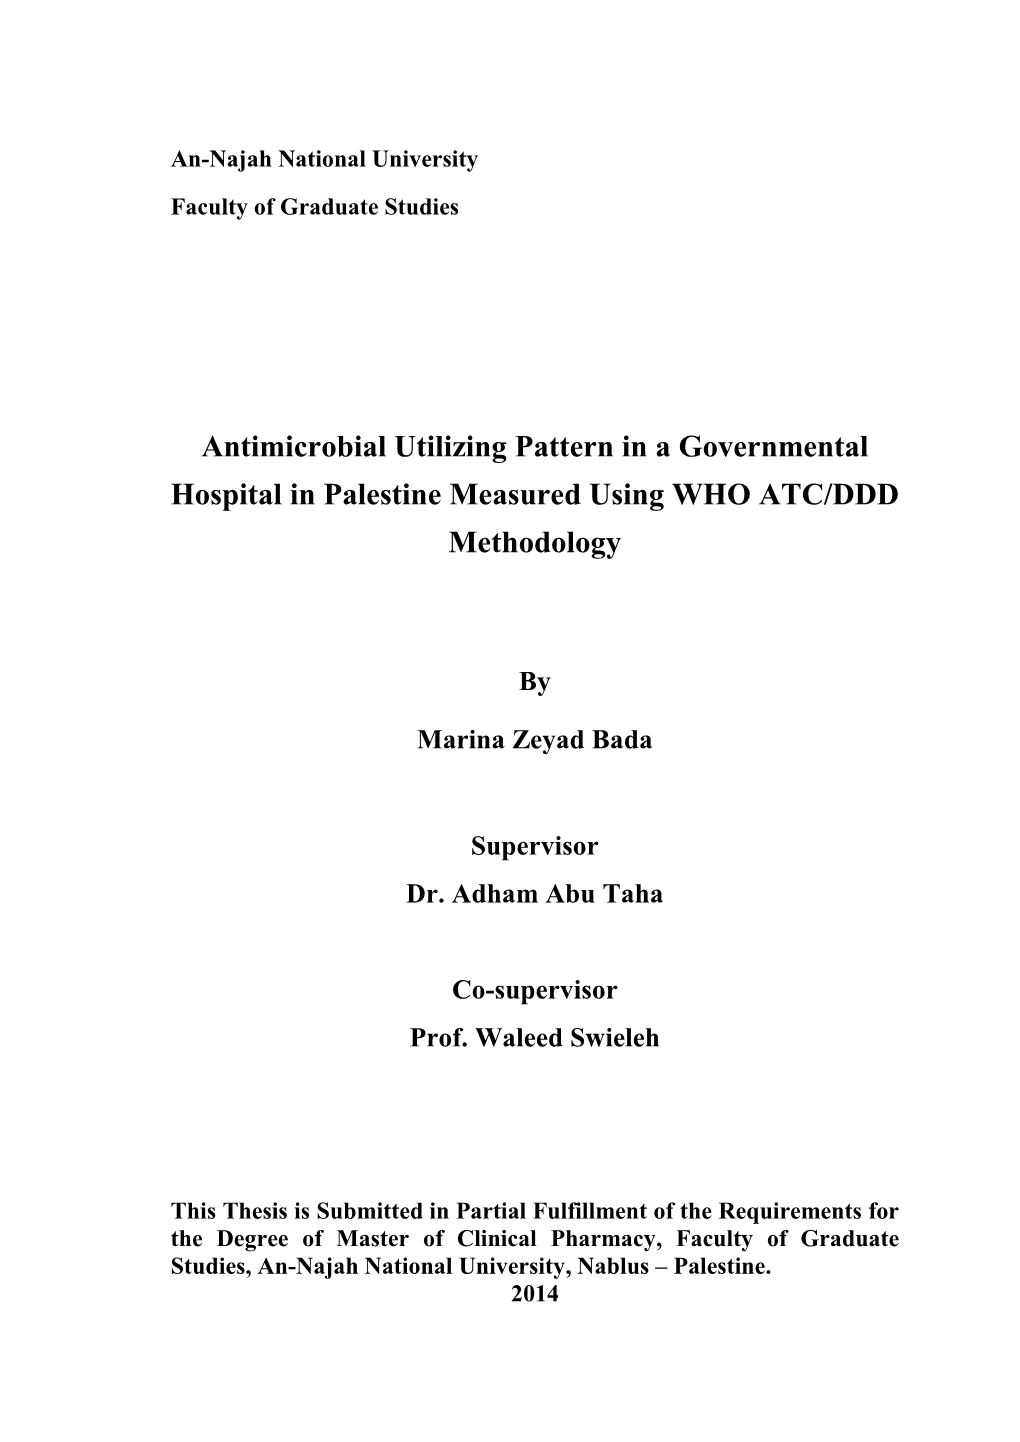 Antimicrobial Utilizing Pattern in a Governmental Hospital in Palestine Measured Using WHO ATC/DDD Methodology